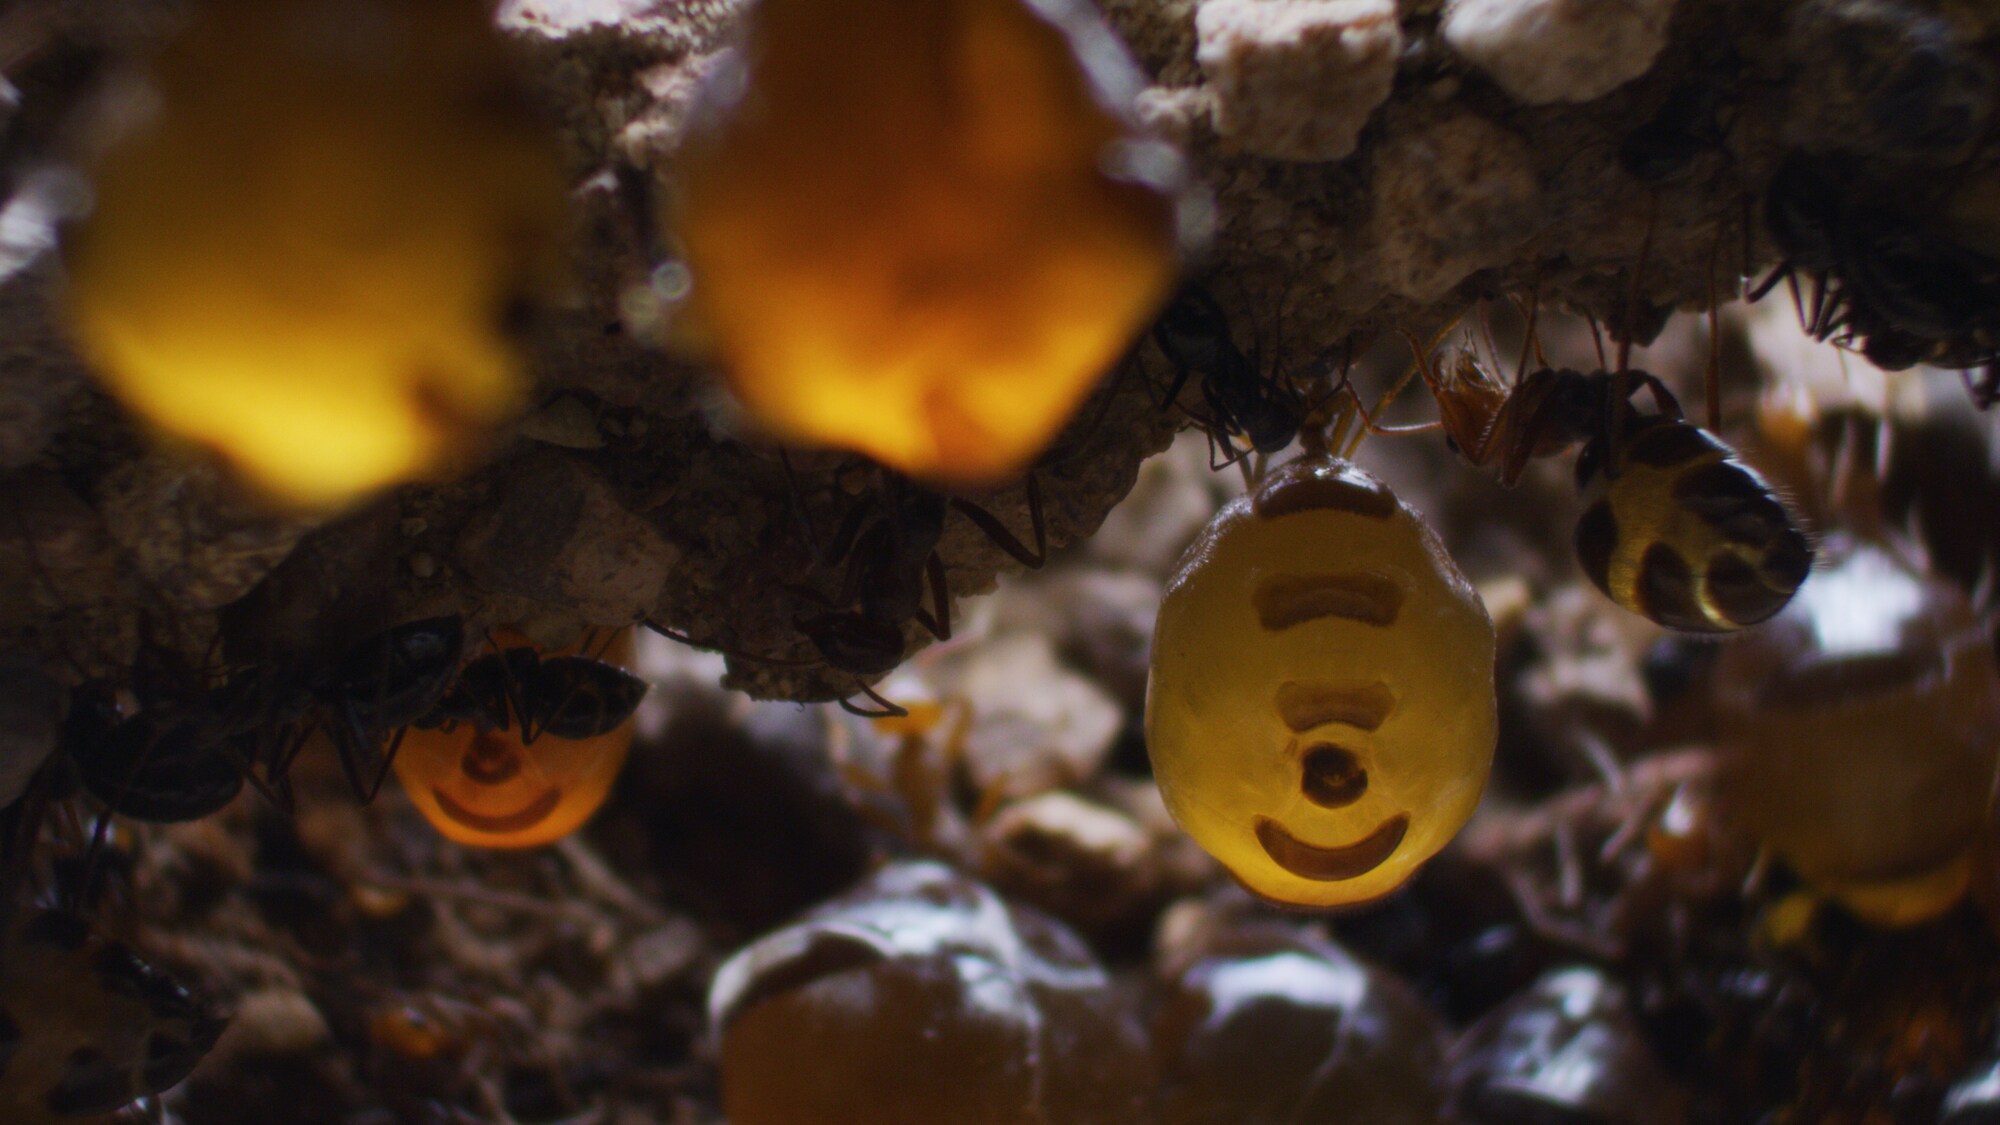 Honeypot ants create 'living larders' deep underground, using specialized workers whose abdomens can swell to the size of a cherry with nectar gathered during times of plenty by their comrades. (National Geographic for Disney+)